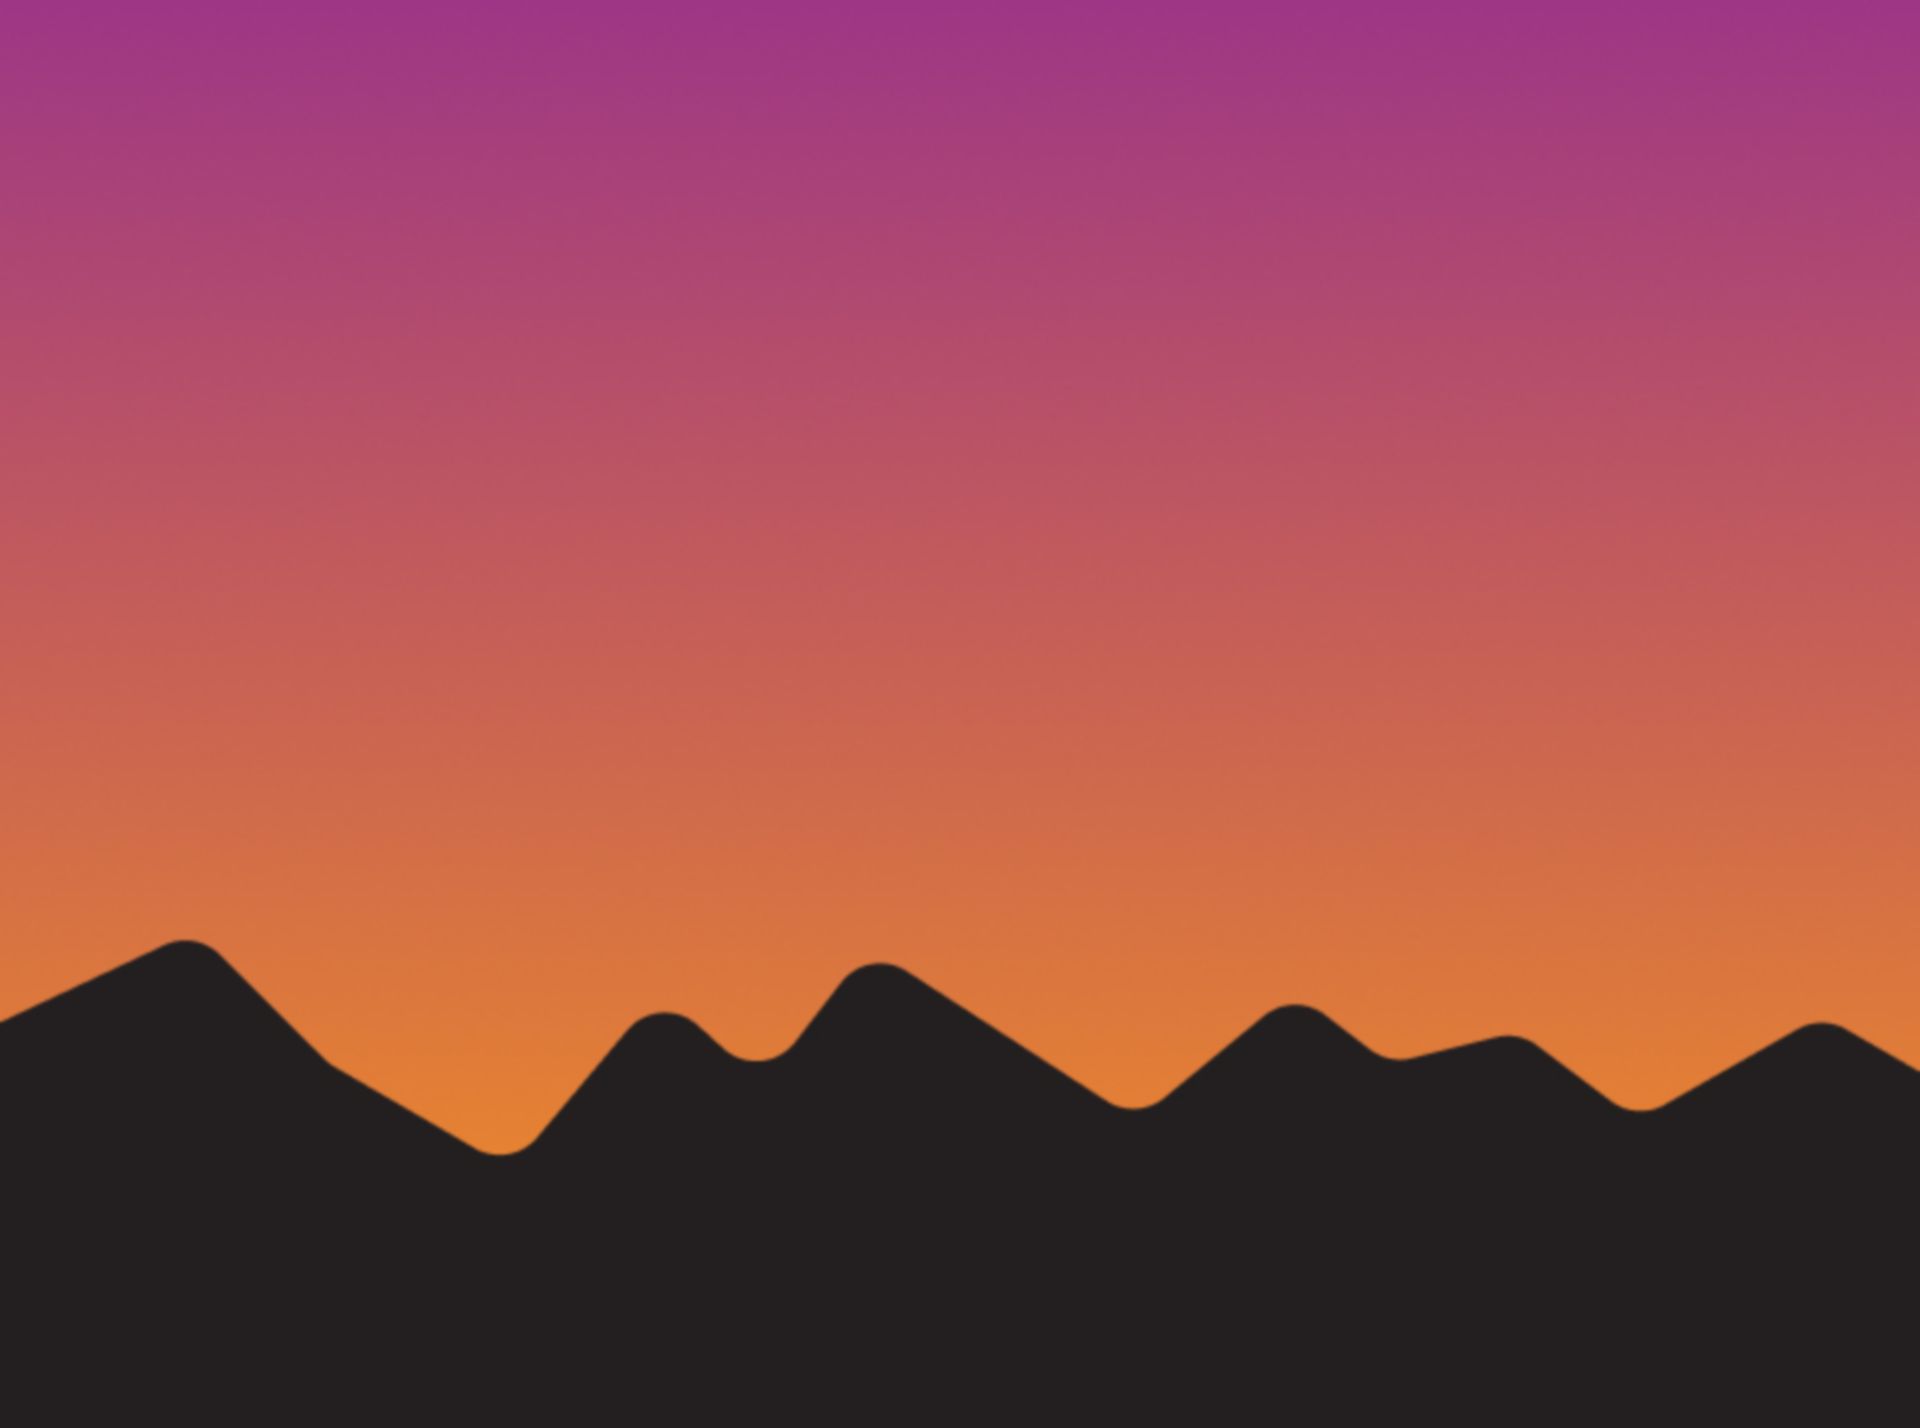 background image of a sunset behind a mountain range silhouette